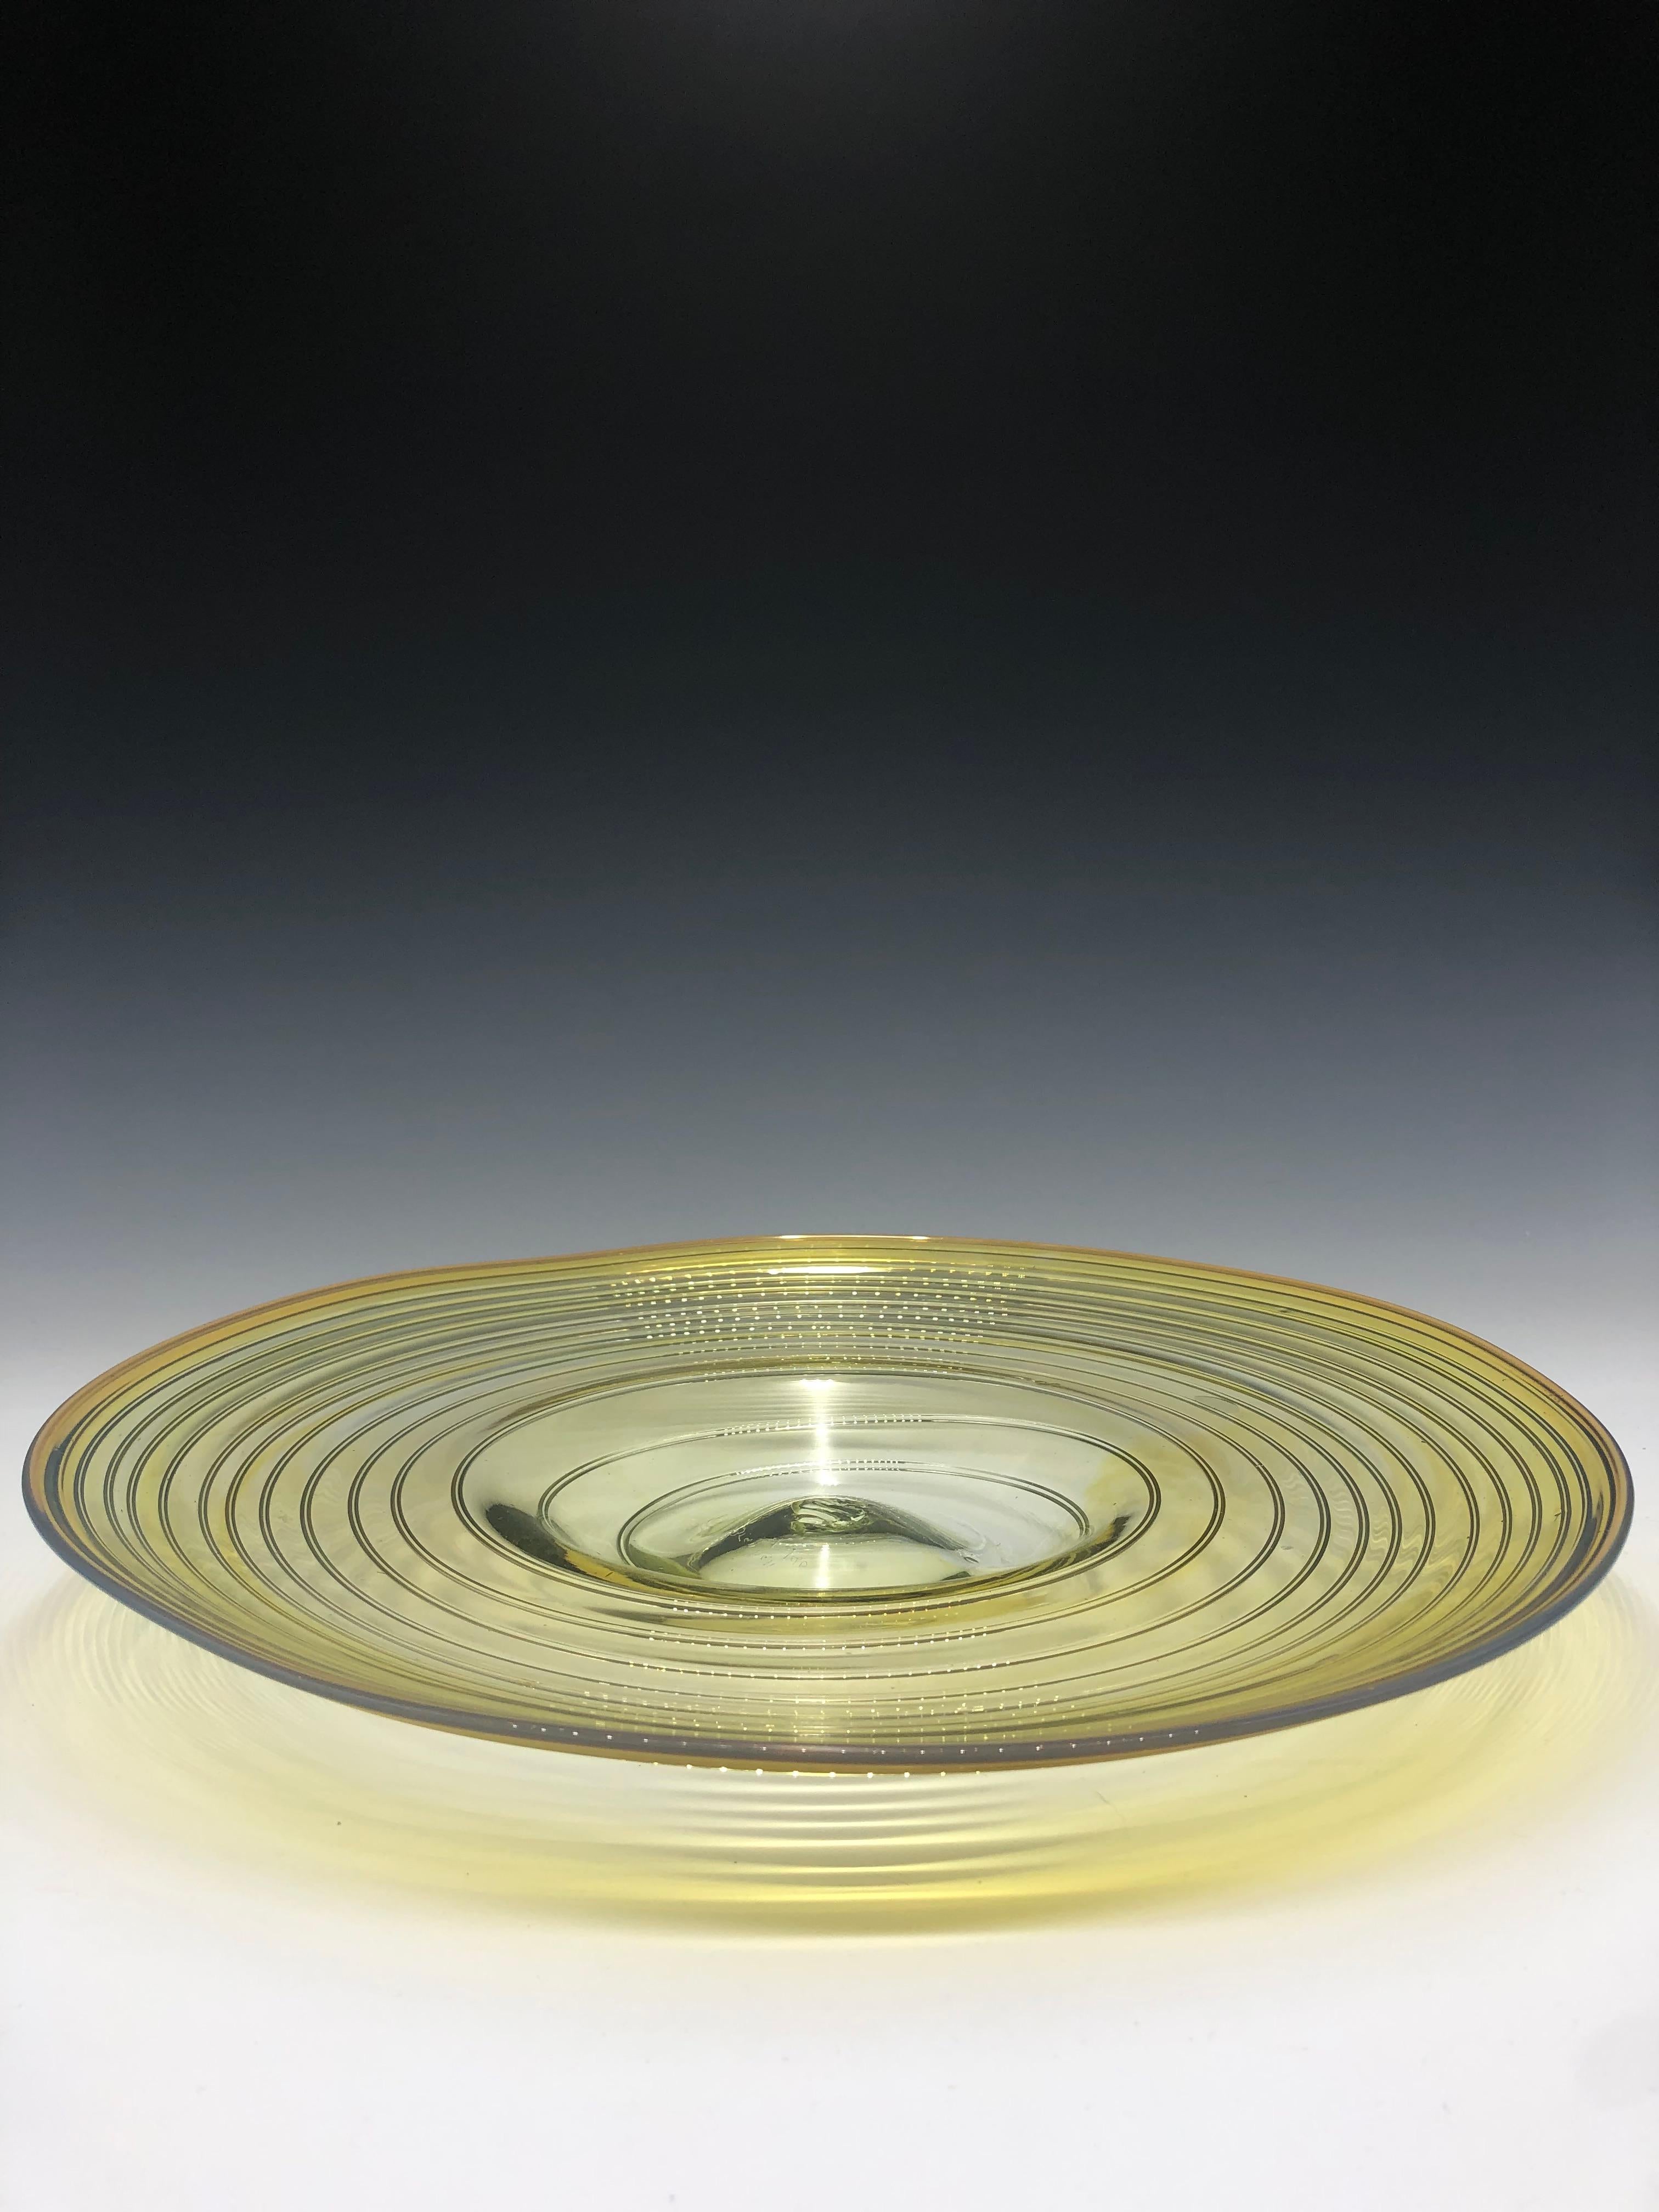 Beautiful yellow glass centerpiece created by Peter Bramhall, signed and dated 8/2/80 on the base. 

The swirl design platter is uniquely shaped and is fully hand-blown, leaving a subtle pontil mark on its base. The glass itself is a stunning clear